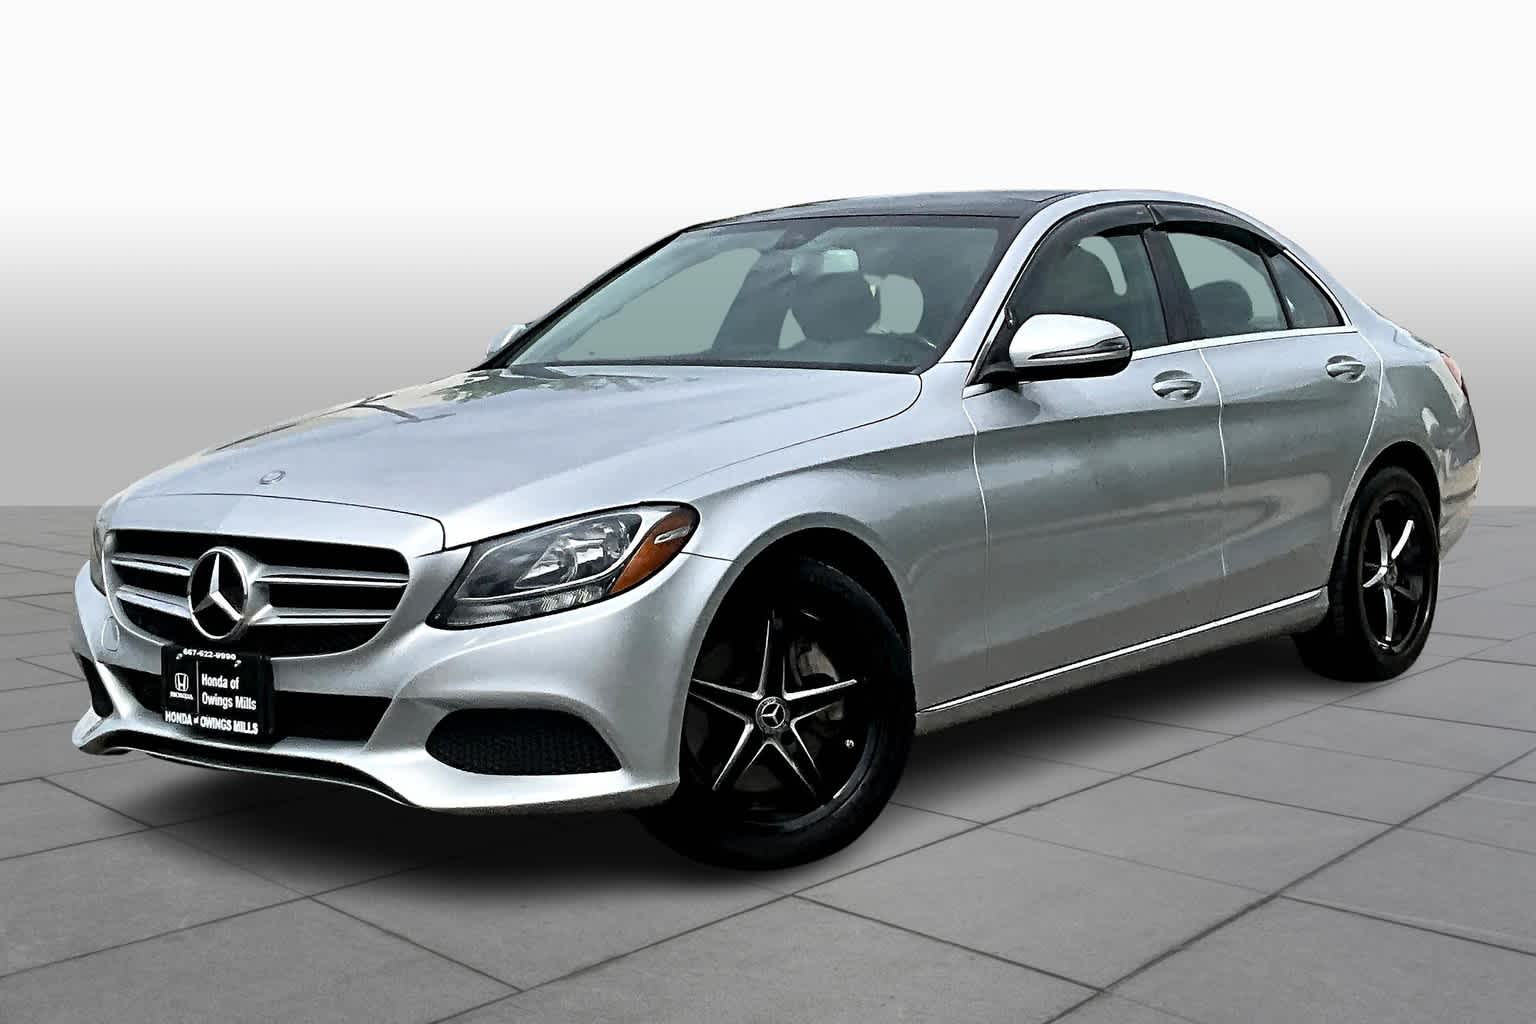 2017 Mercedes-Benz C-Class Owings Mills MD